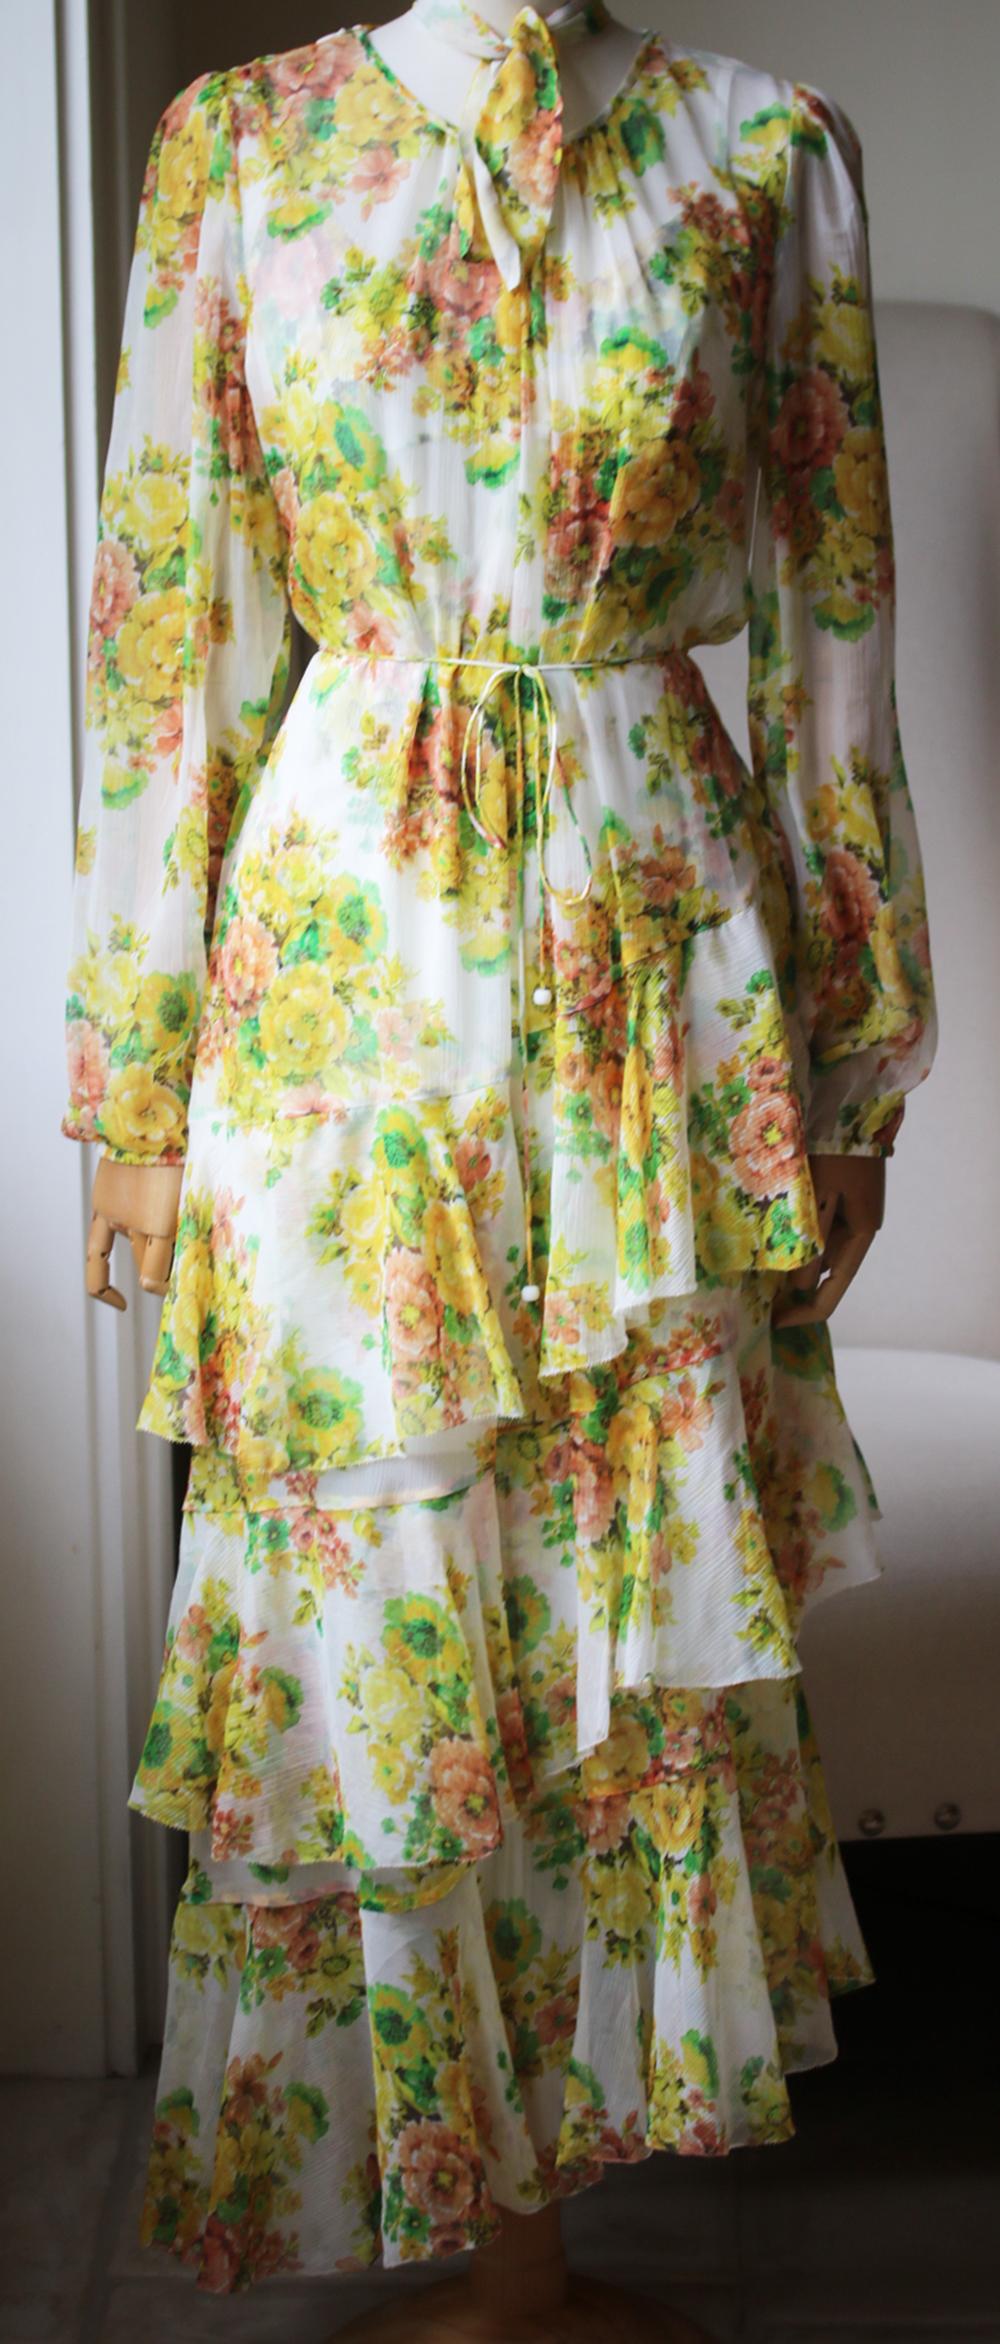 This yellow Zimmermann Golden tiered ruffle floral print midi dress features a round neck with a detachable neck tie, long blouson sleeves, a Citrus Stamp Floral print, an asymmetric ruffle tiered skirt, waist tie and printed slip dress. 100% Silk.